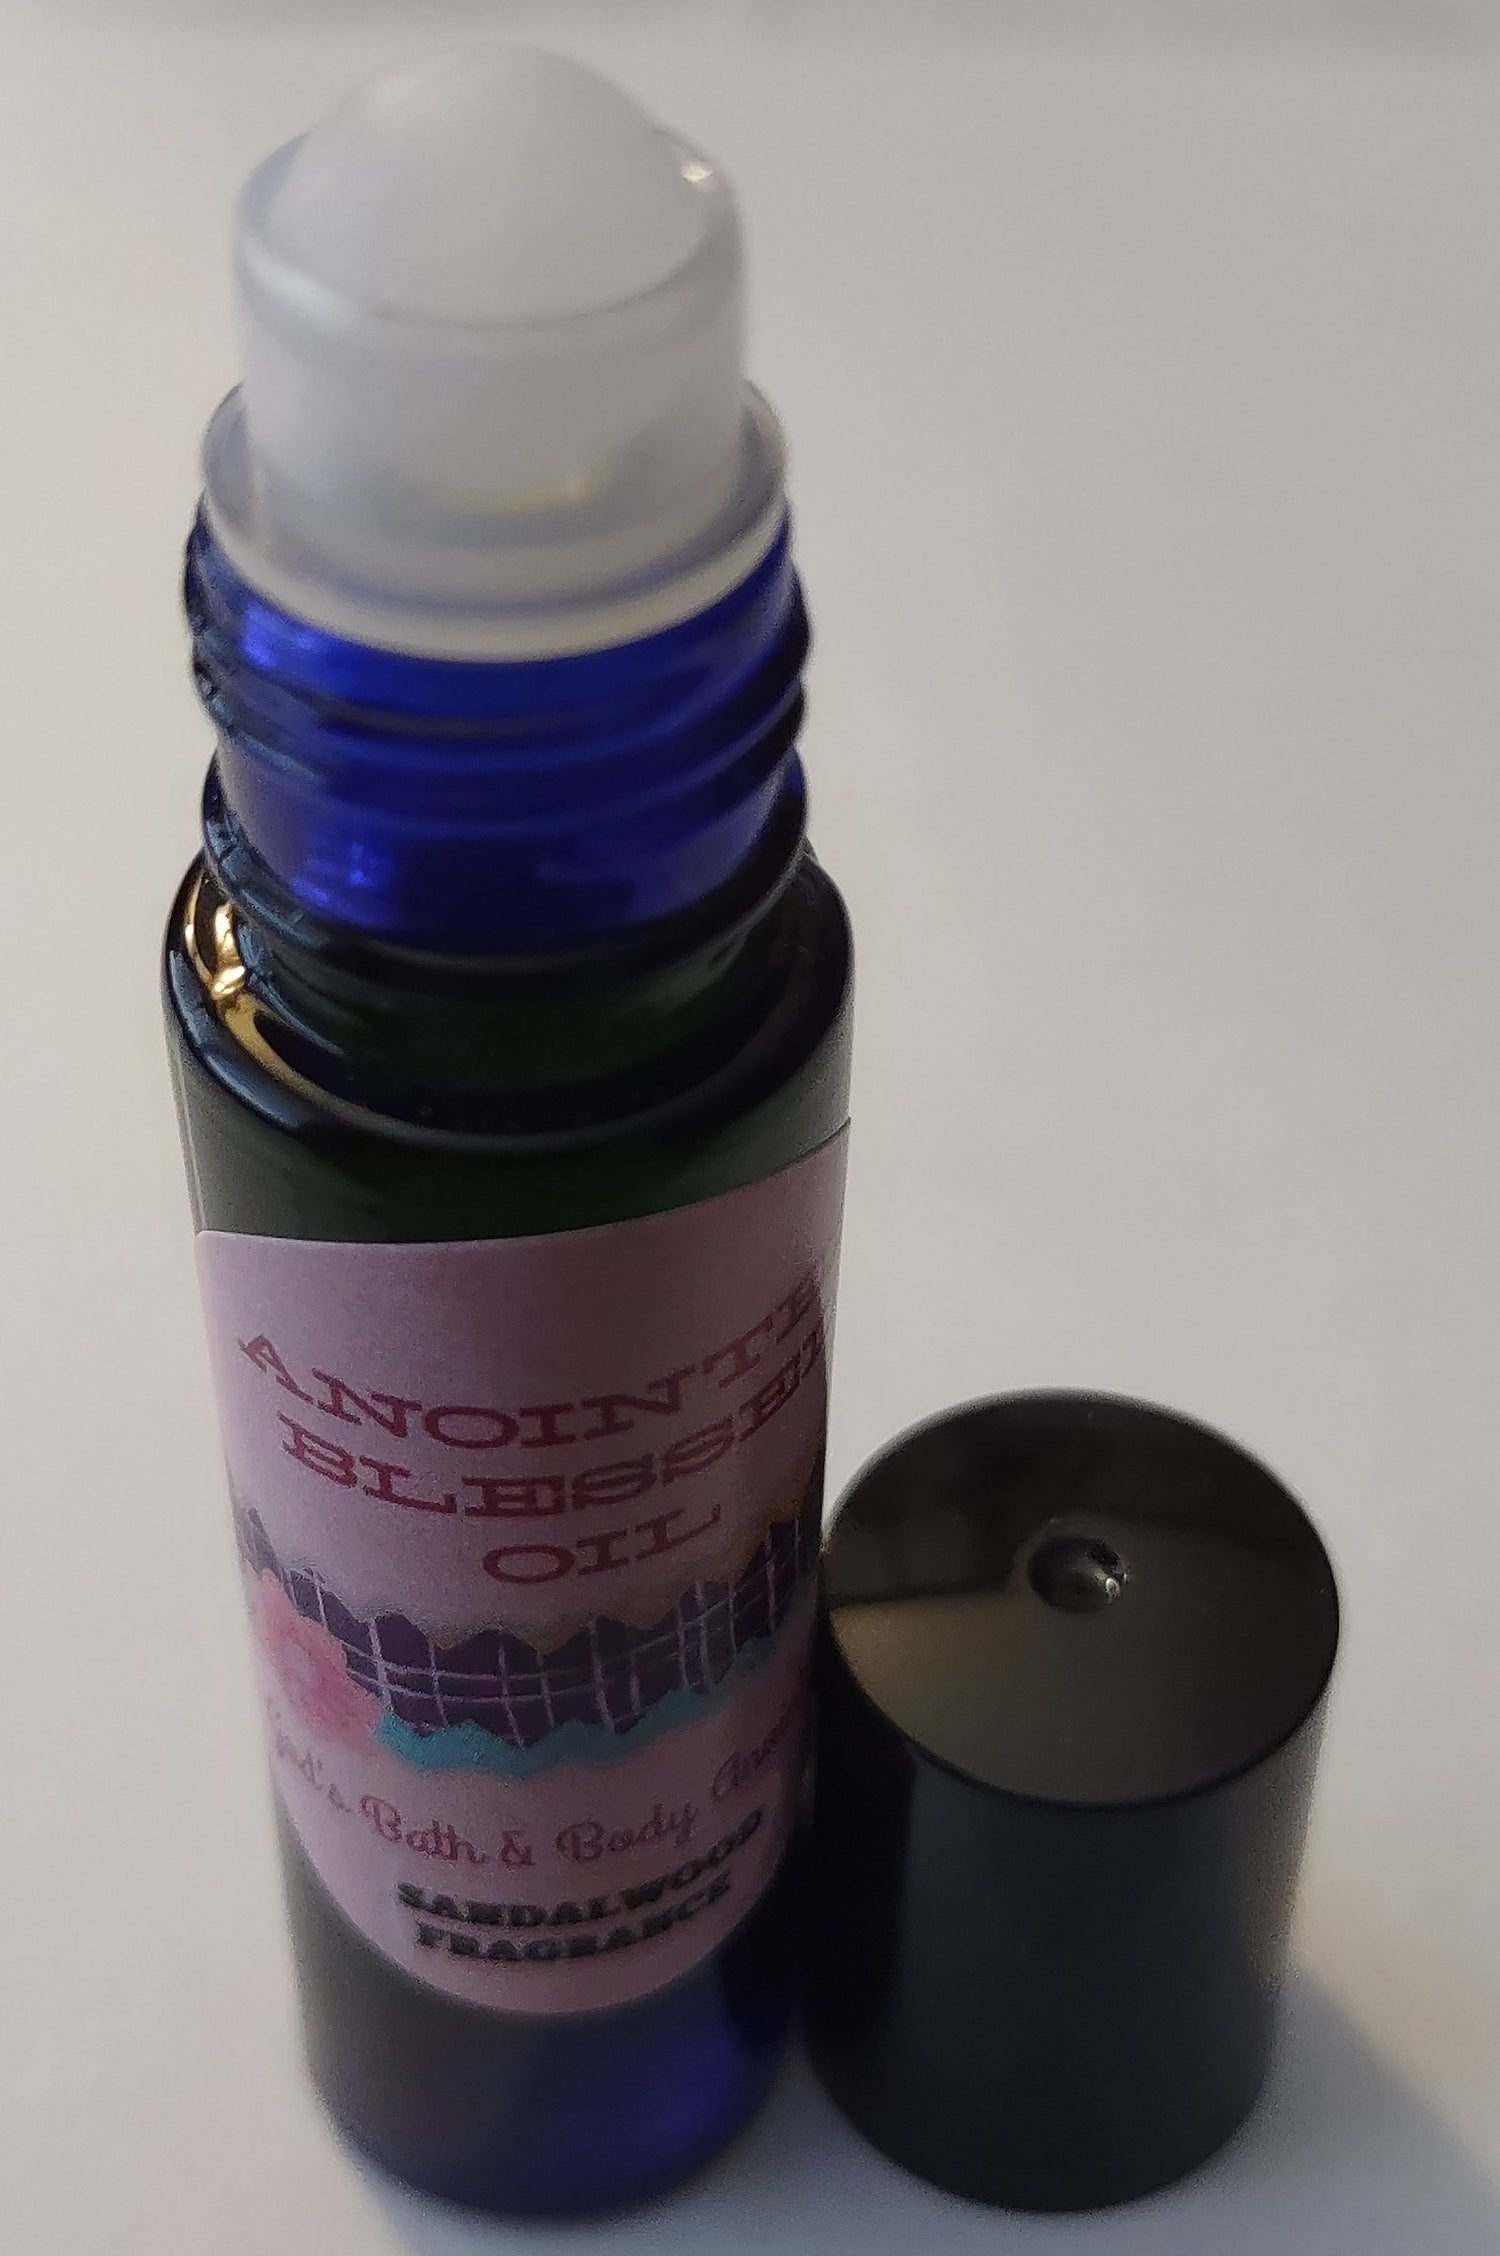 Anointed blessed oil 1/3oz roll-on bottle